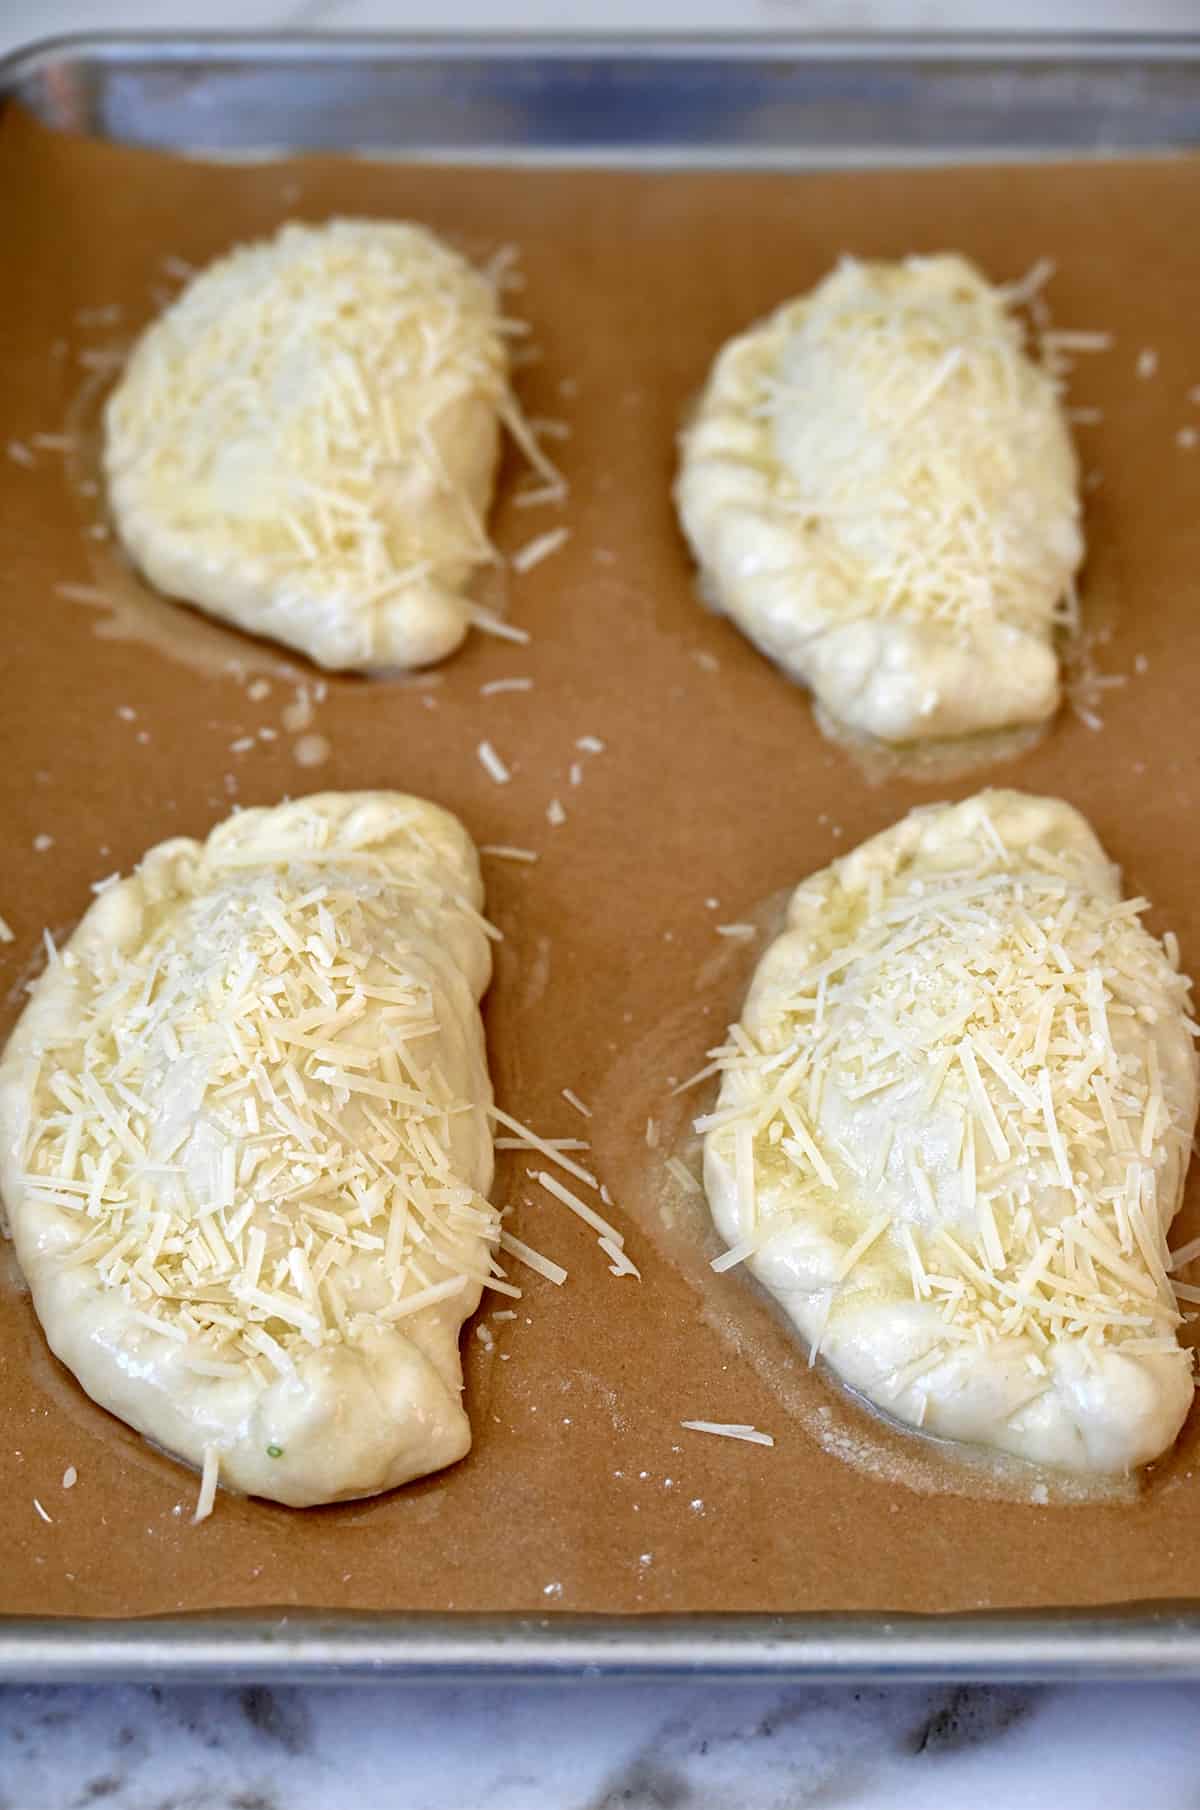 Four unbaked calzones brushed with melted butter and sprinkled with shredded Parmesan cheese on a parchment paper-lined baking sheet.